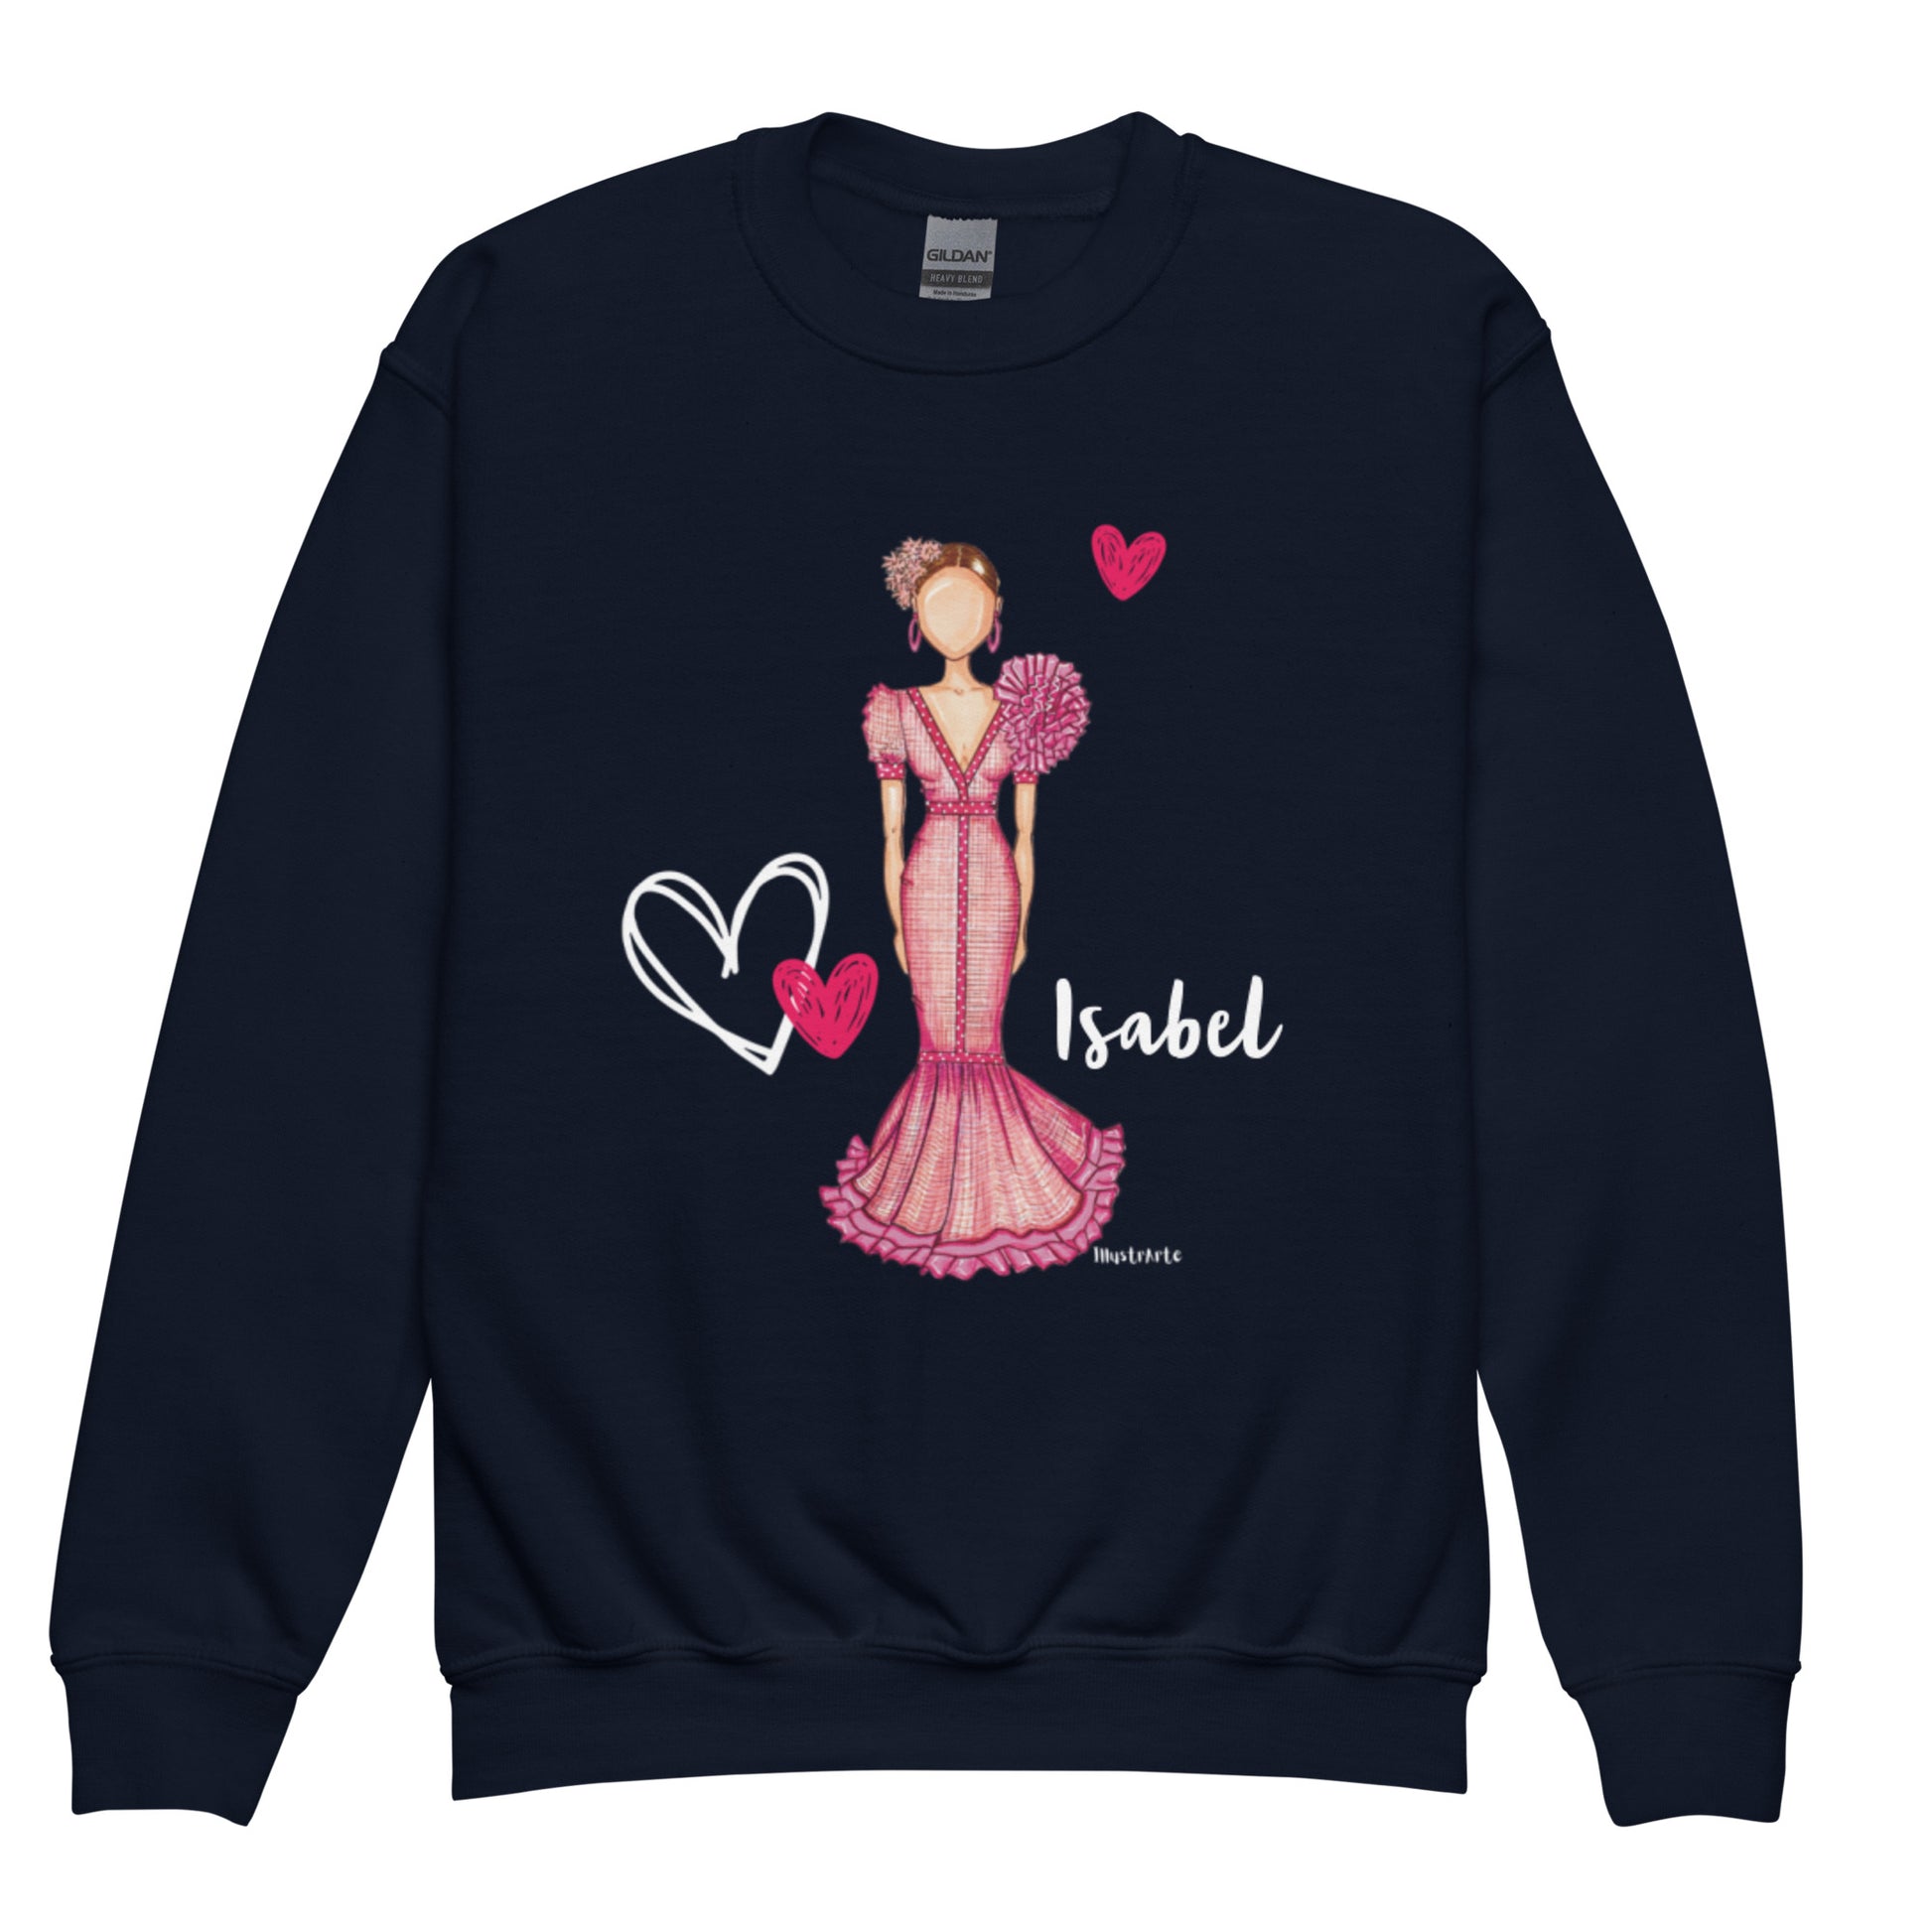 a sweatshirt with a woman in a pink dress and hearts